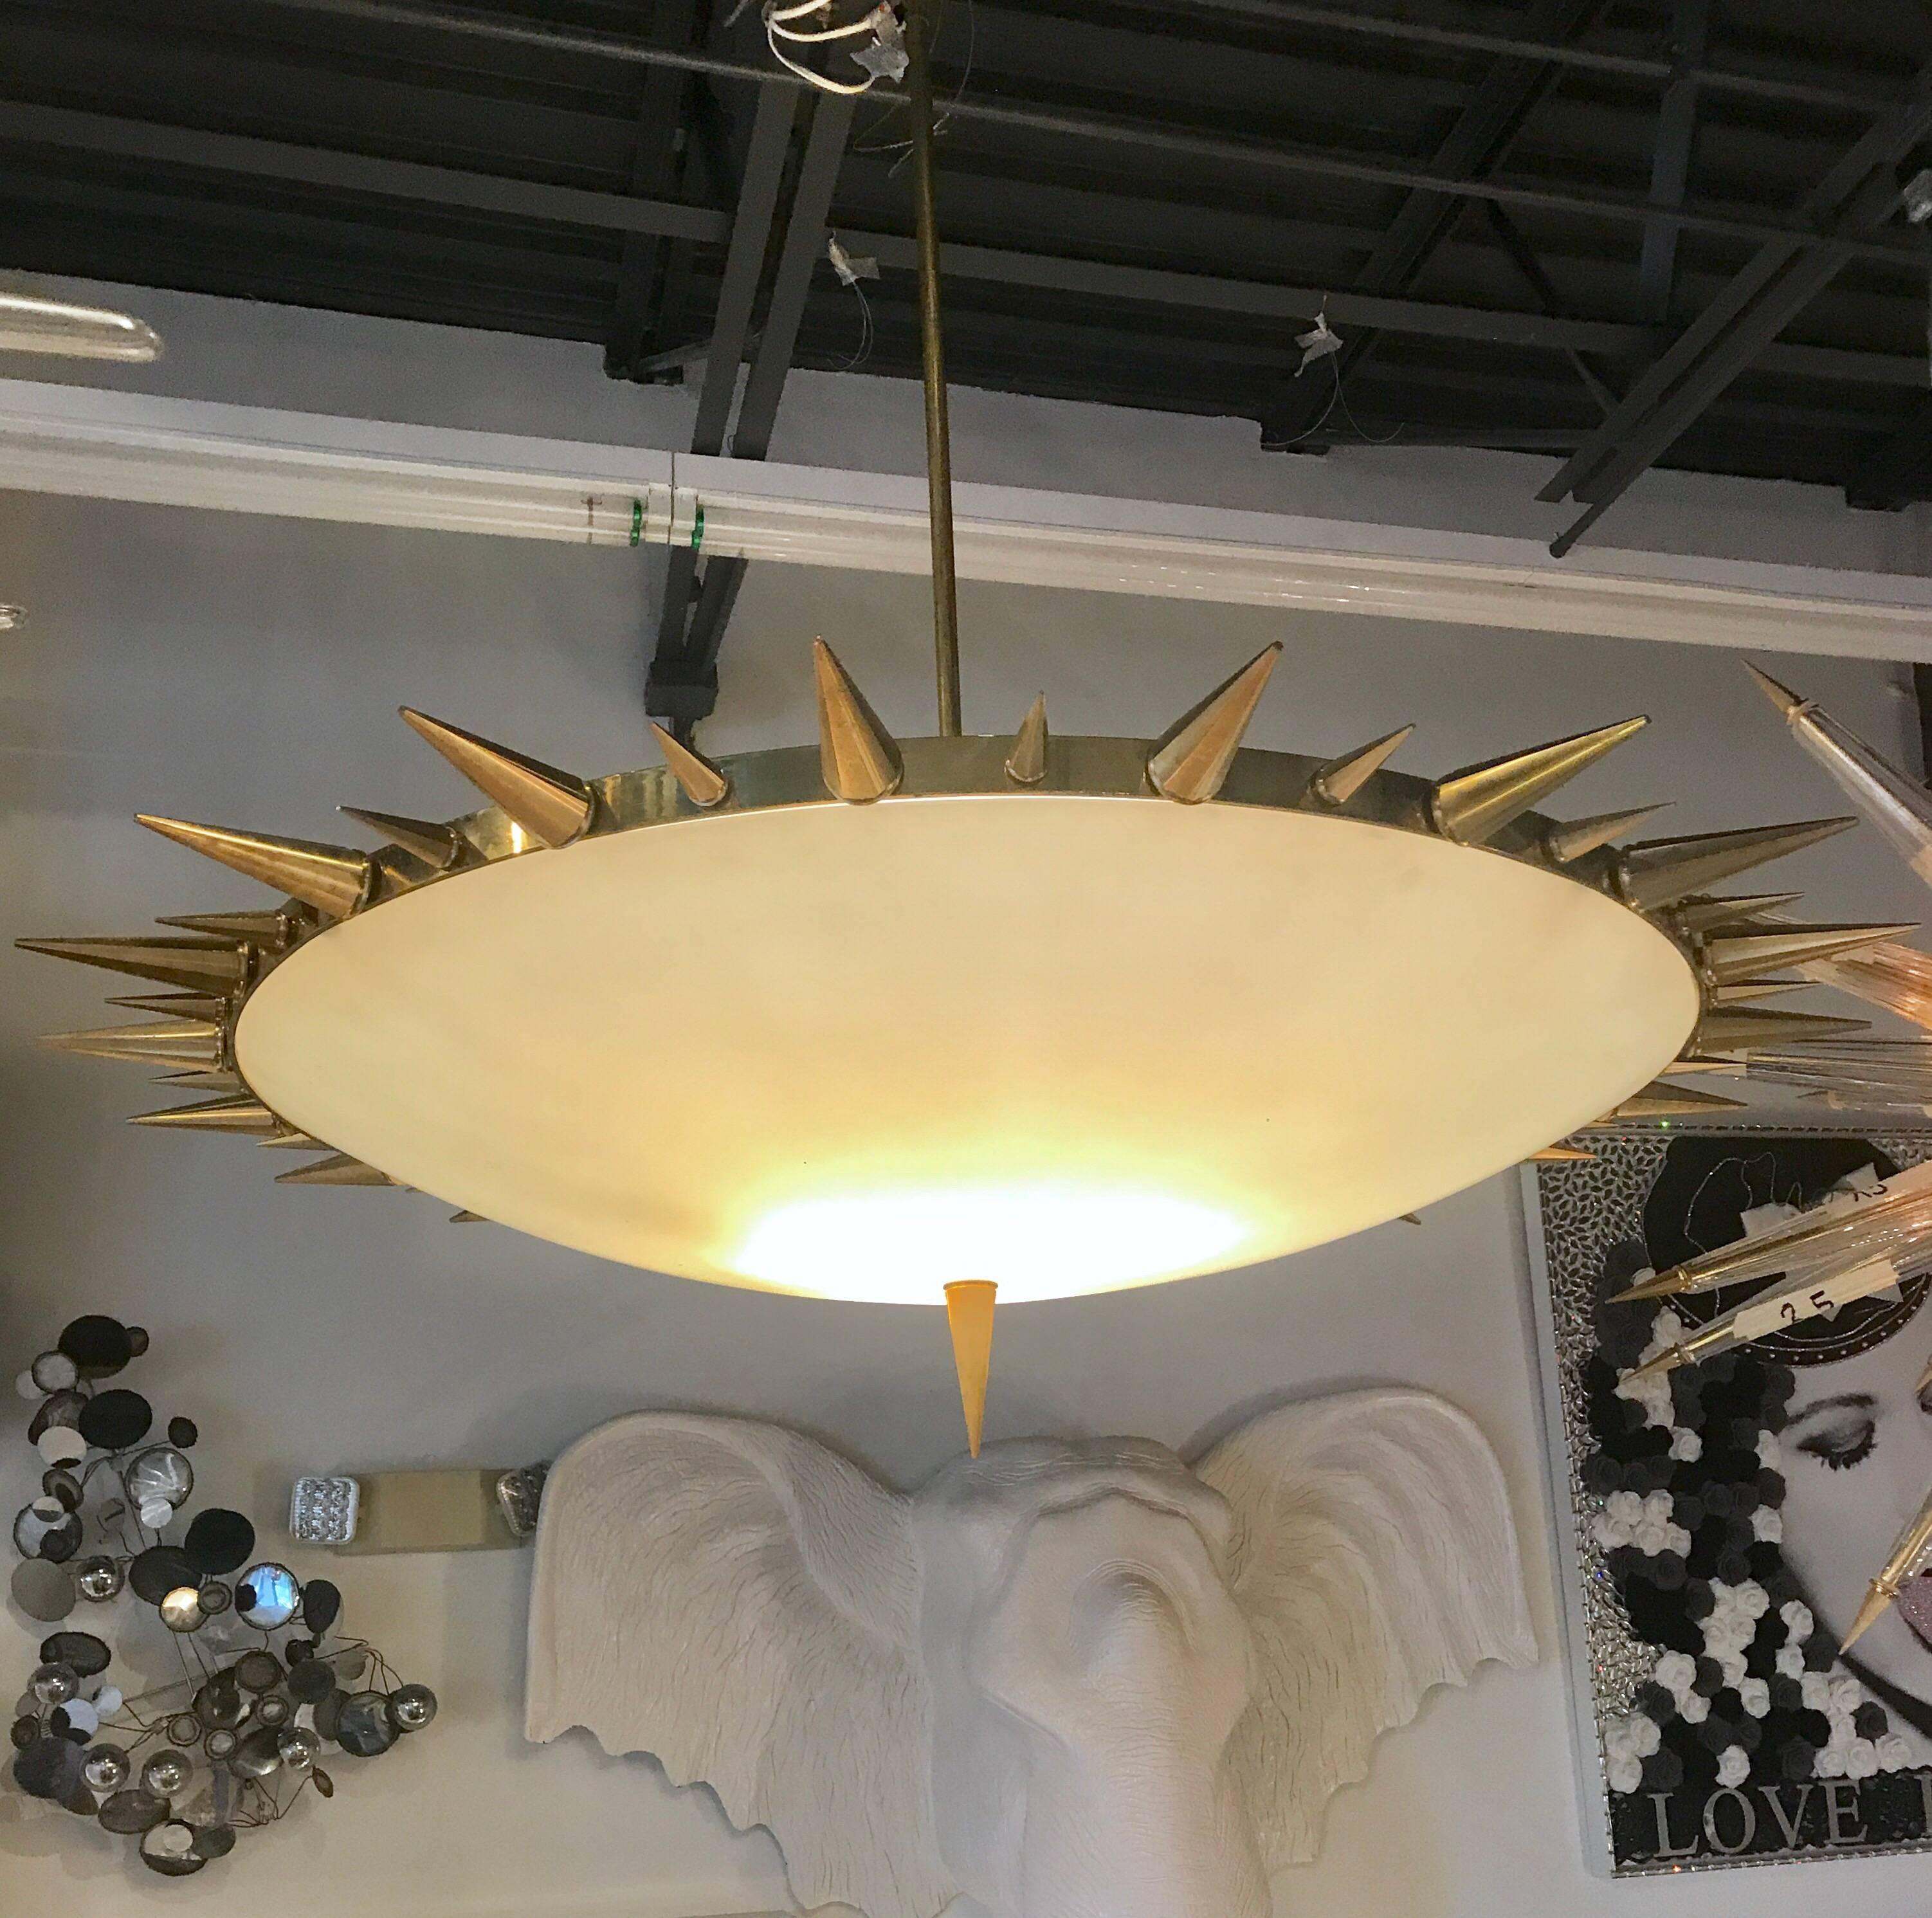 A majestic and unique Italian chandelier of frosted glass with bronze spikes and trim.